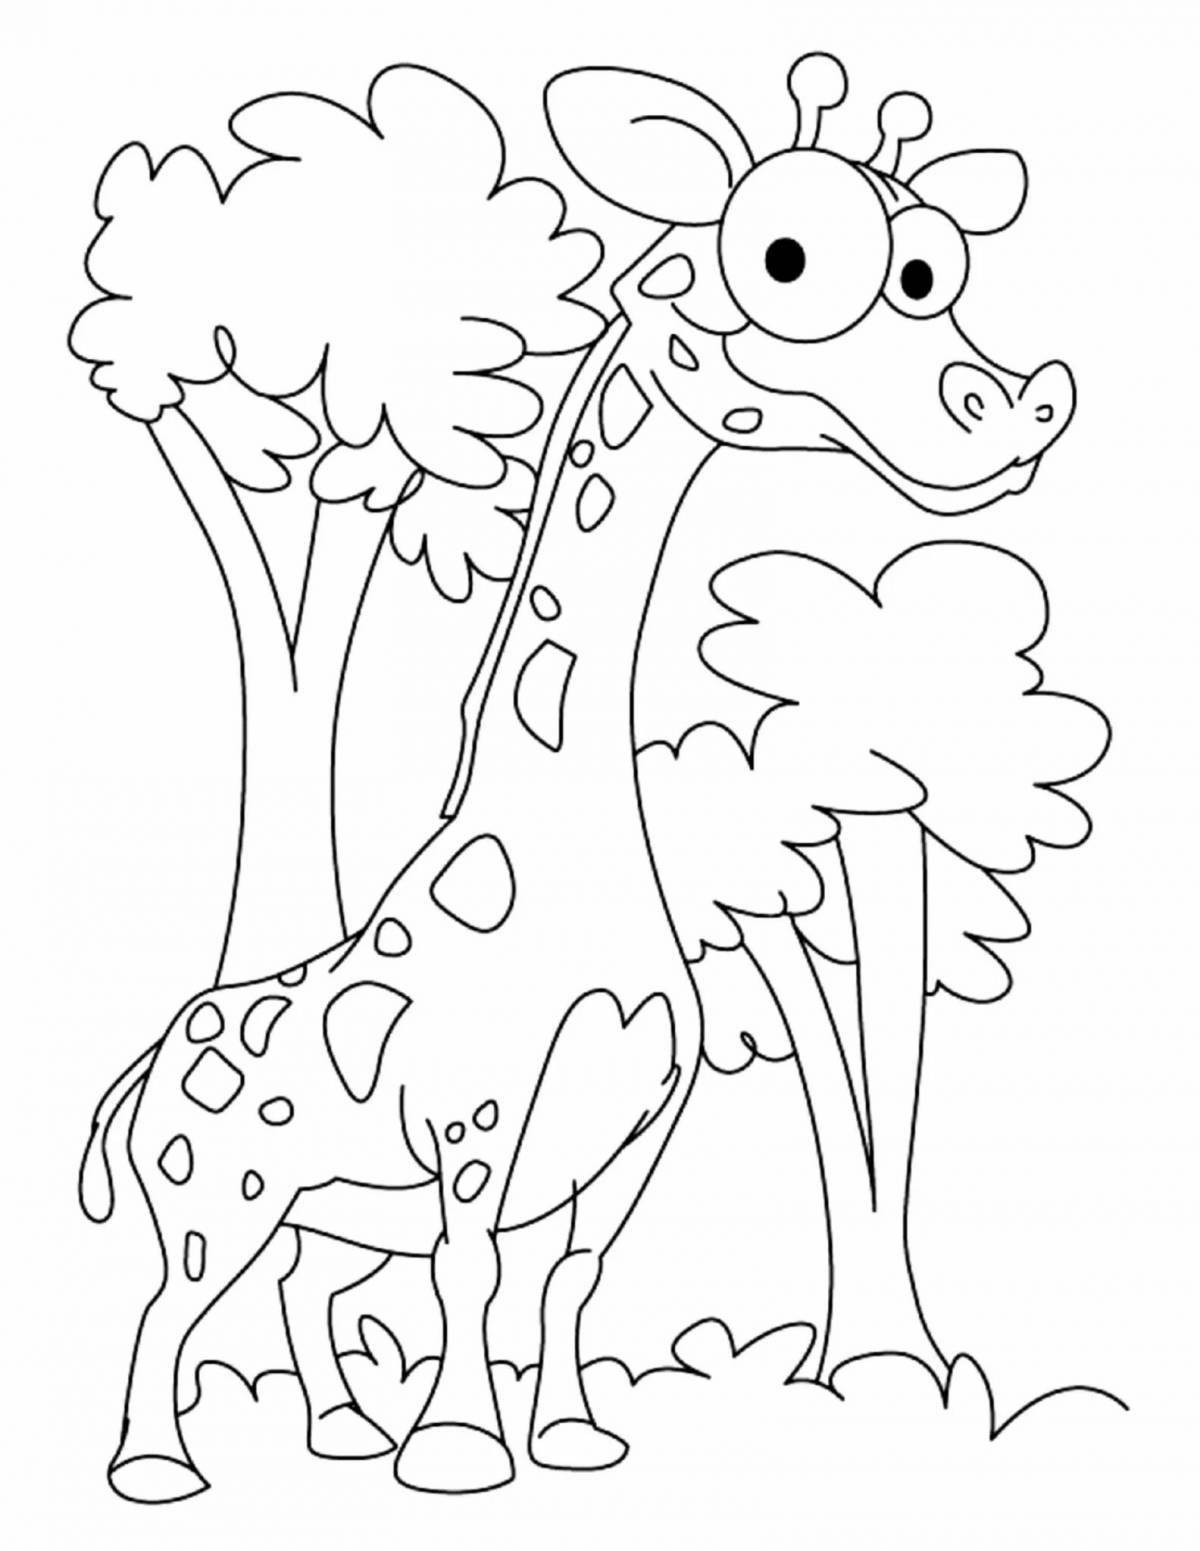 Dazzling animal coloring pages for 7 year olds